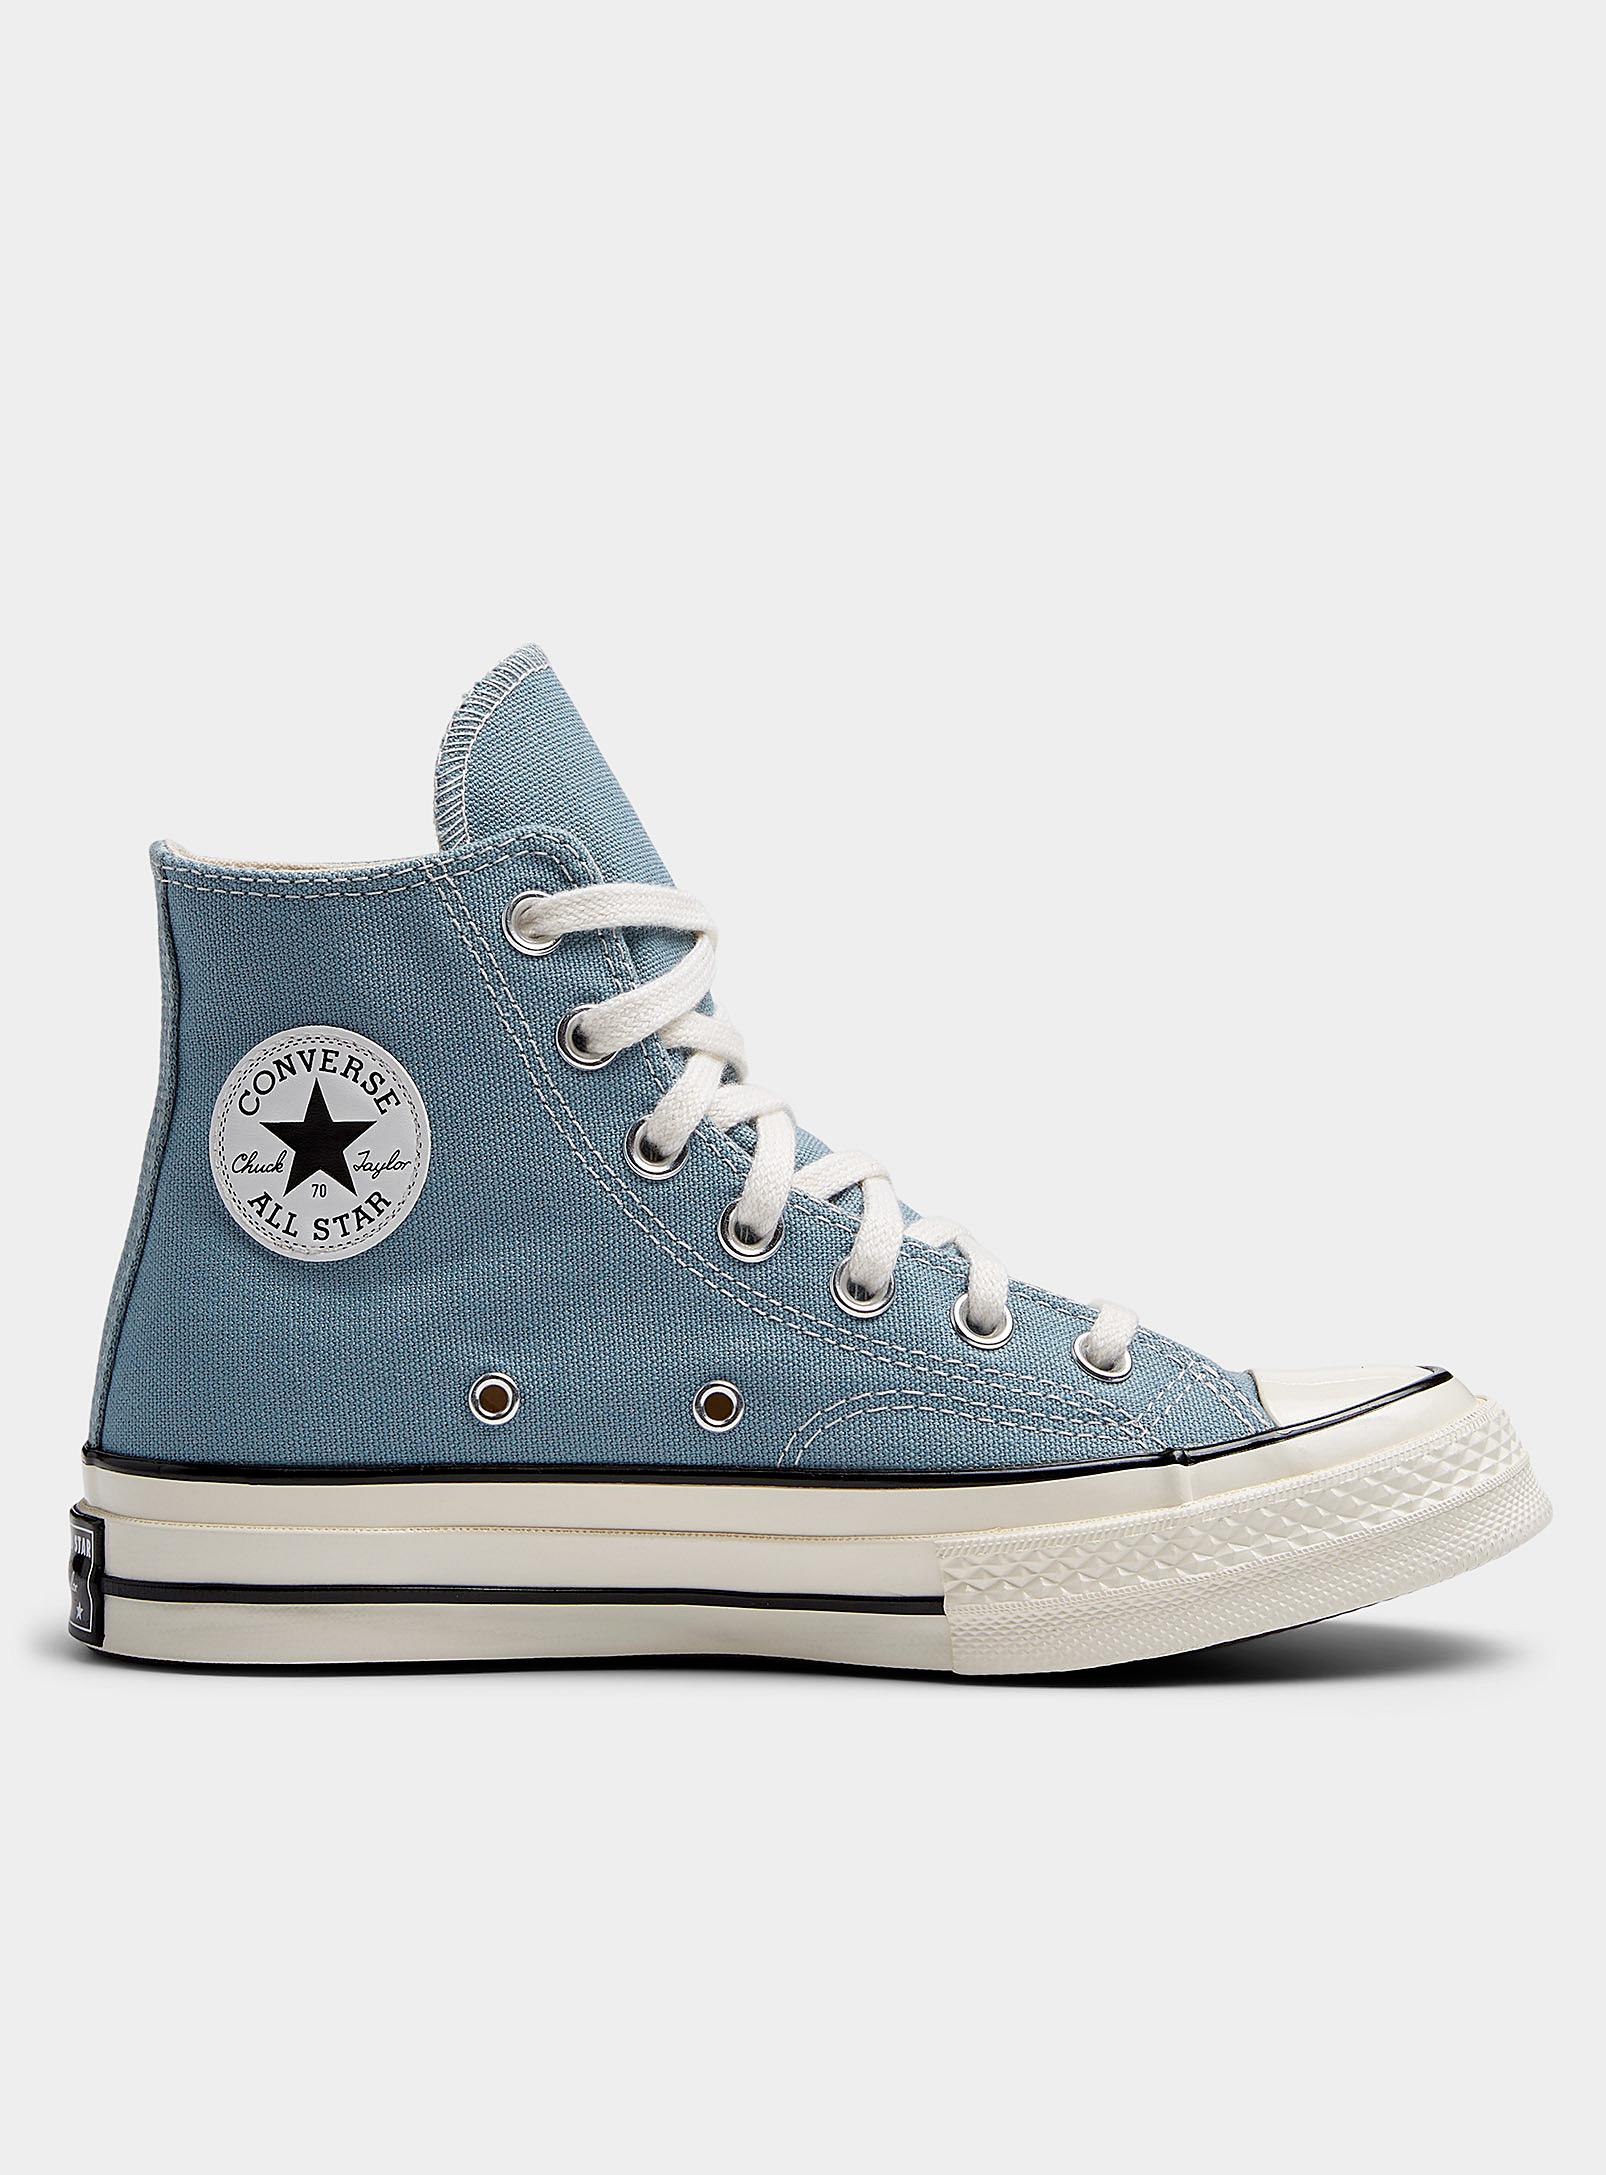 Converse Cocoon Blue Chuck 70 High Top Sneakers Women | Lyst